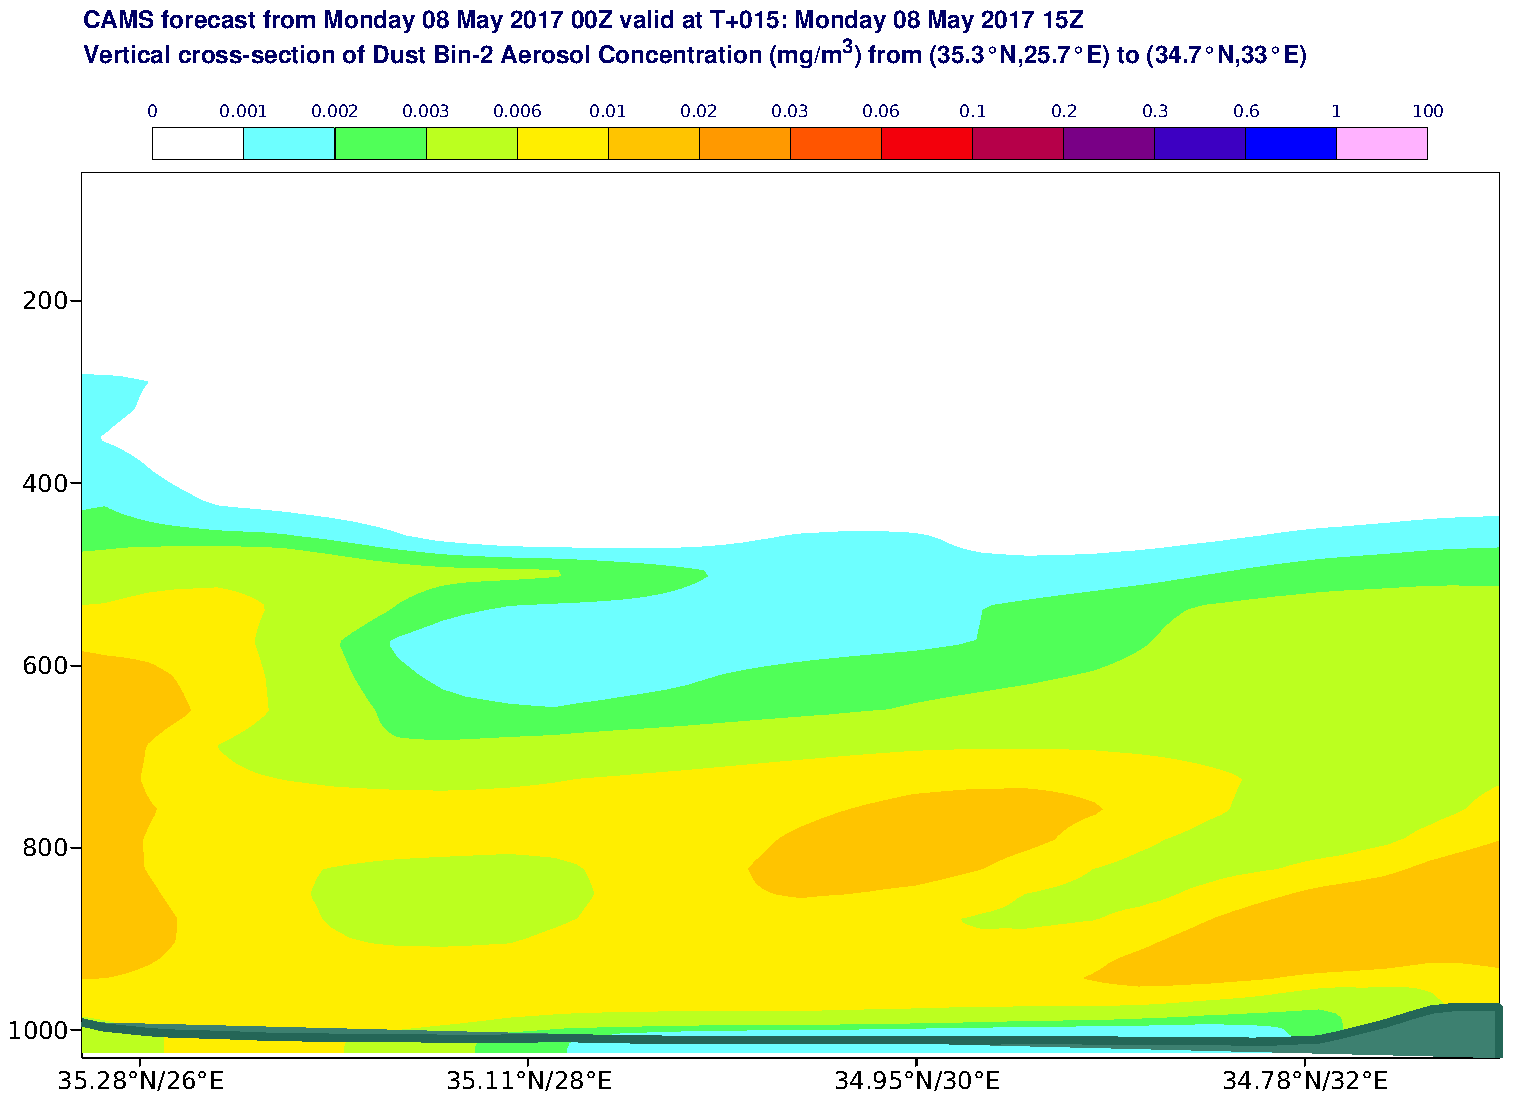 Vertical cross-section of Dust Bin-2 Aerosol Concentration (mg/m3) valid at T15 - 2017-05-08 15:00